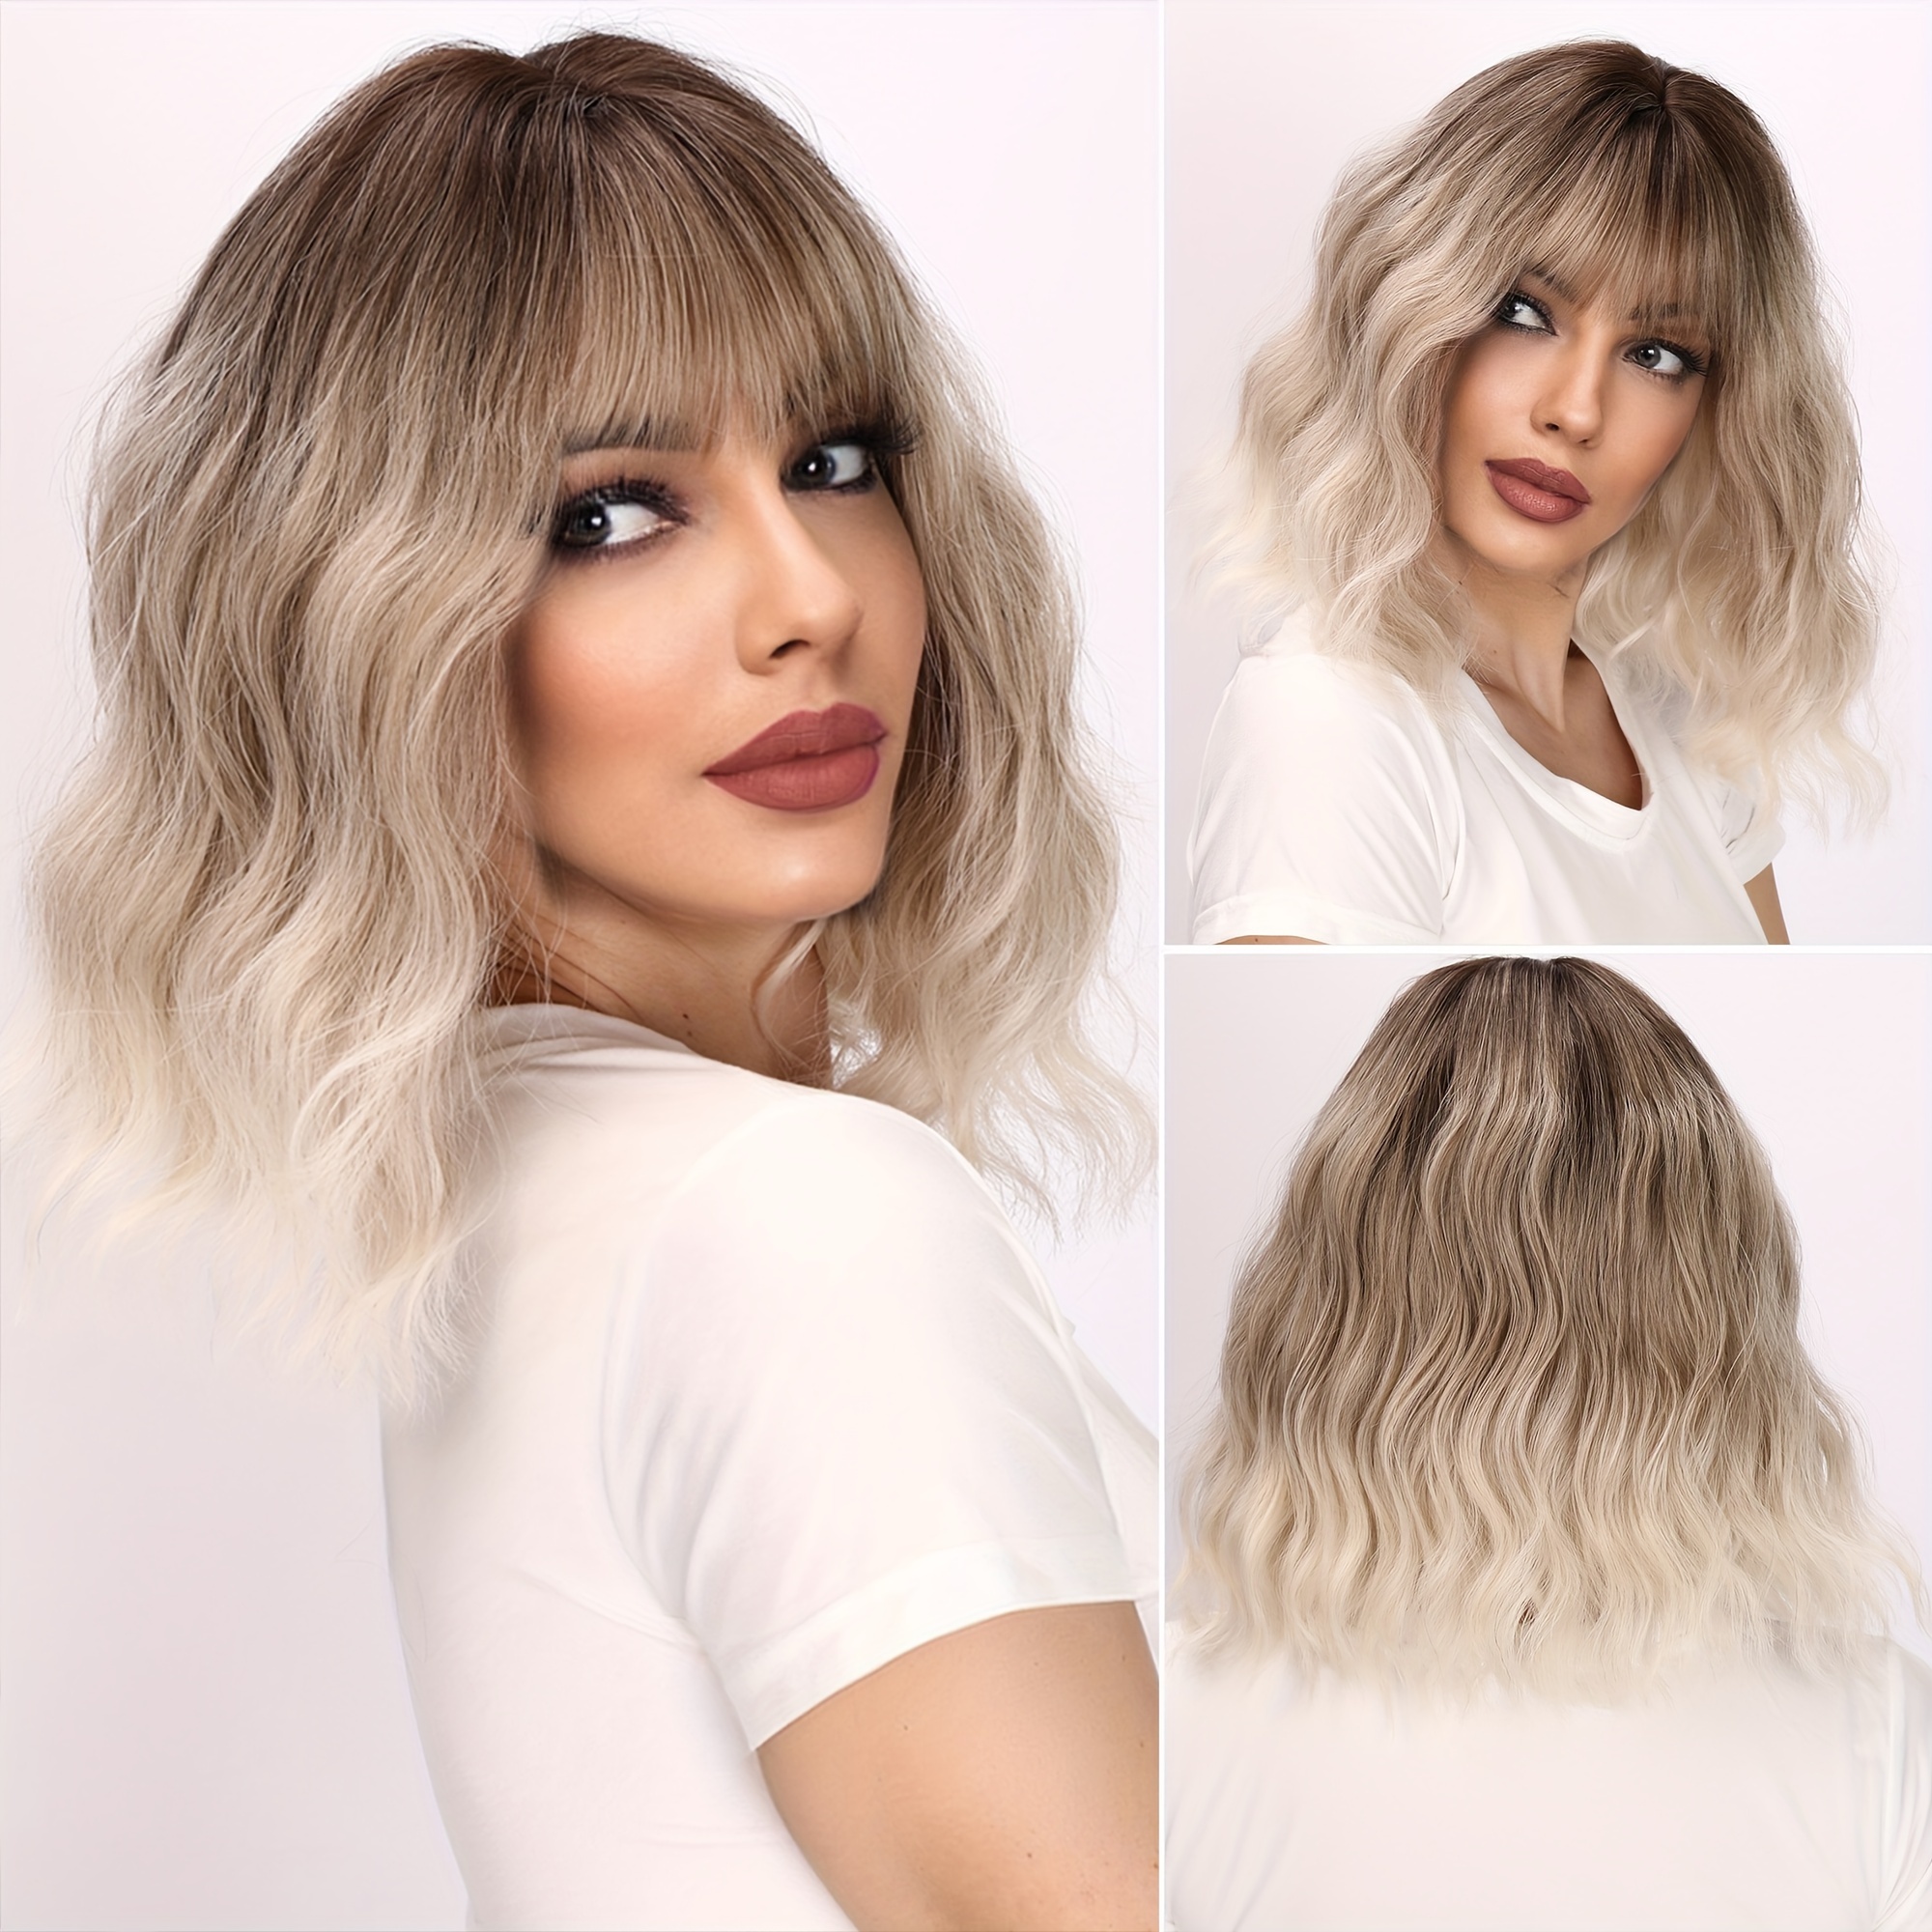 

14 Inch Platinum Brown Charming Bangs Wig - Short, Curly, Heat-resistant - Perfect For Role-playing And Parties - Durable Seamless Edging Synthetic Fiber